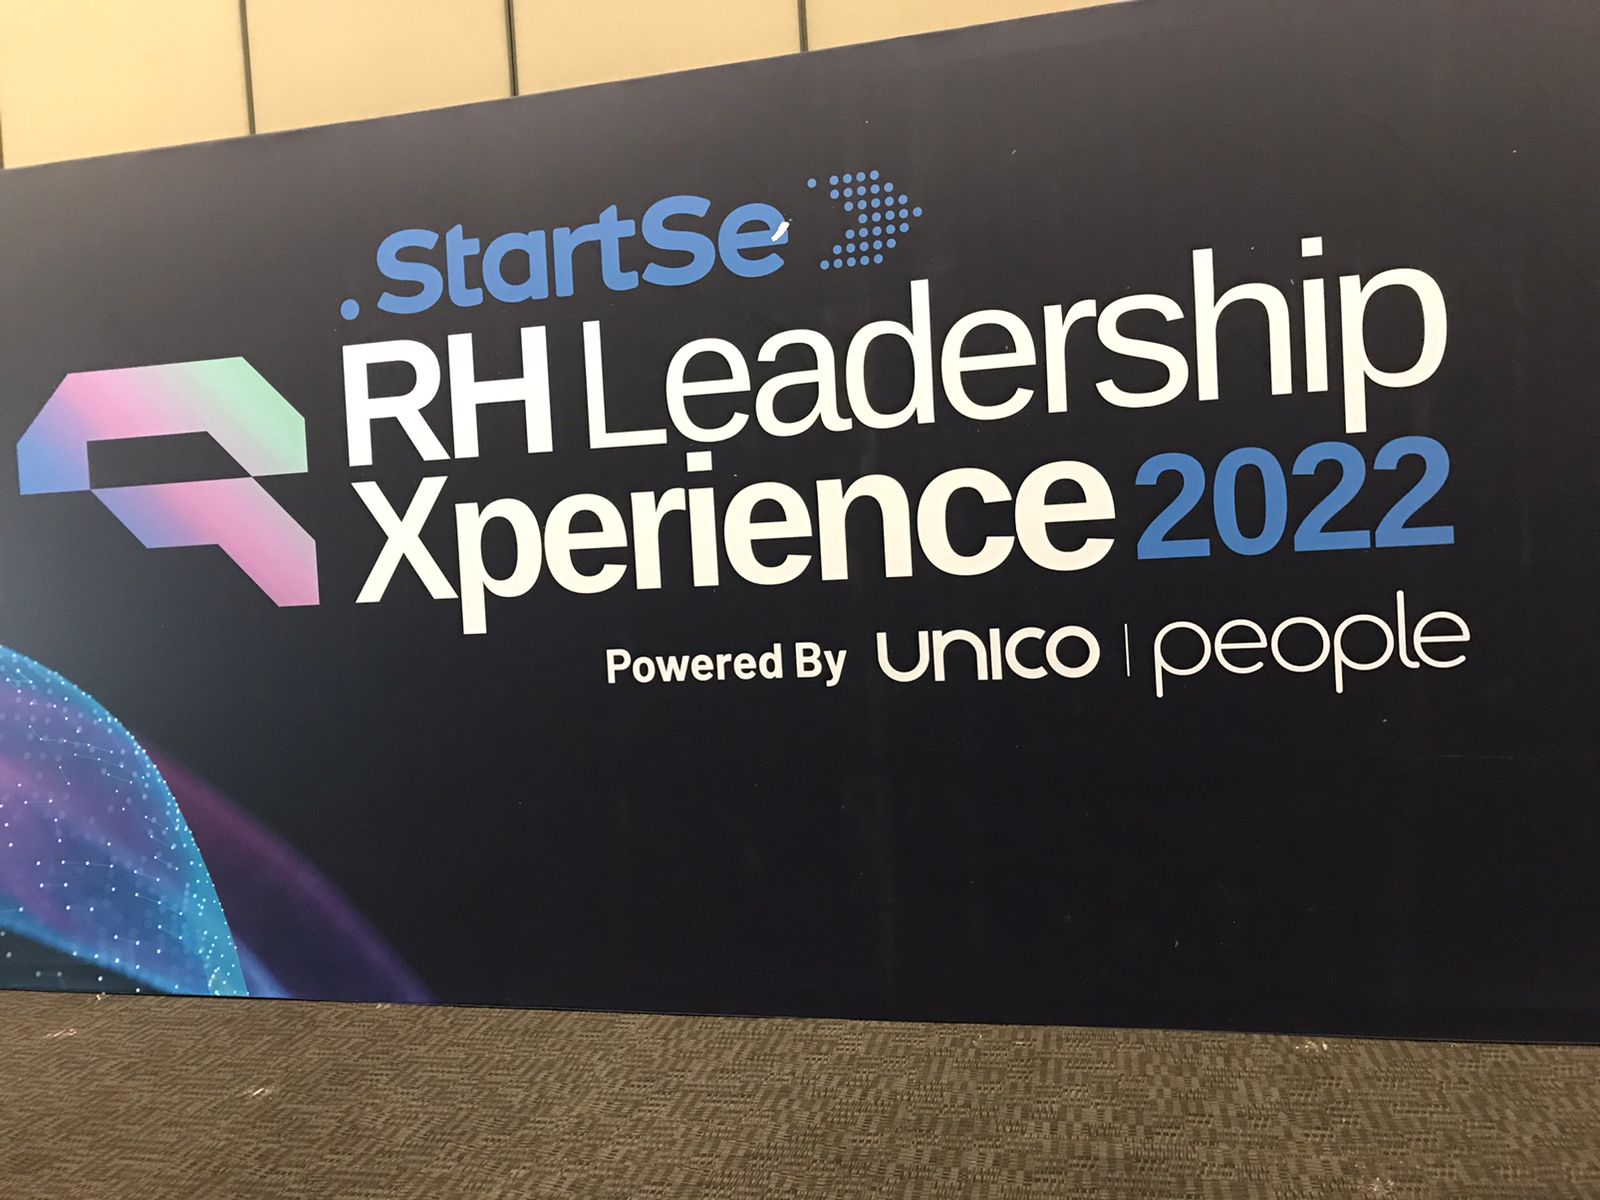 Rh Leadership Xperience by unico people